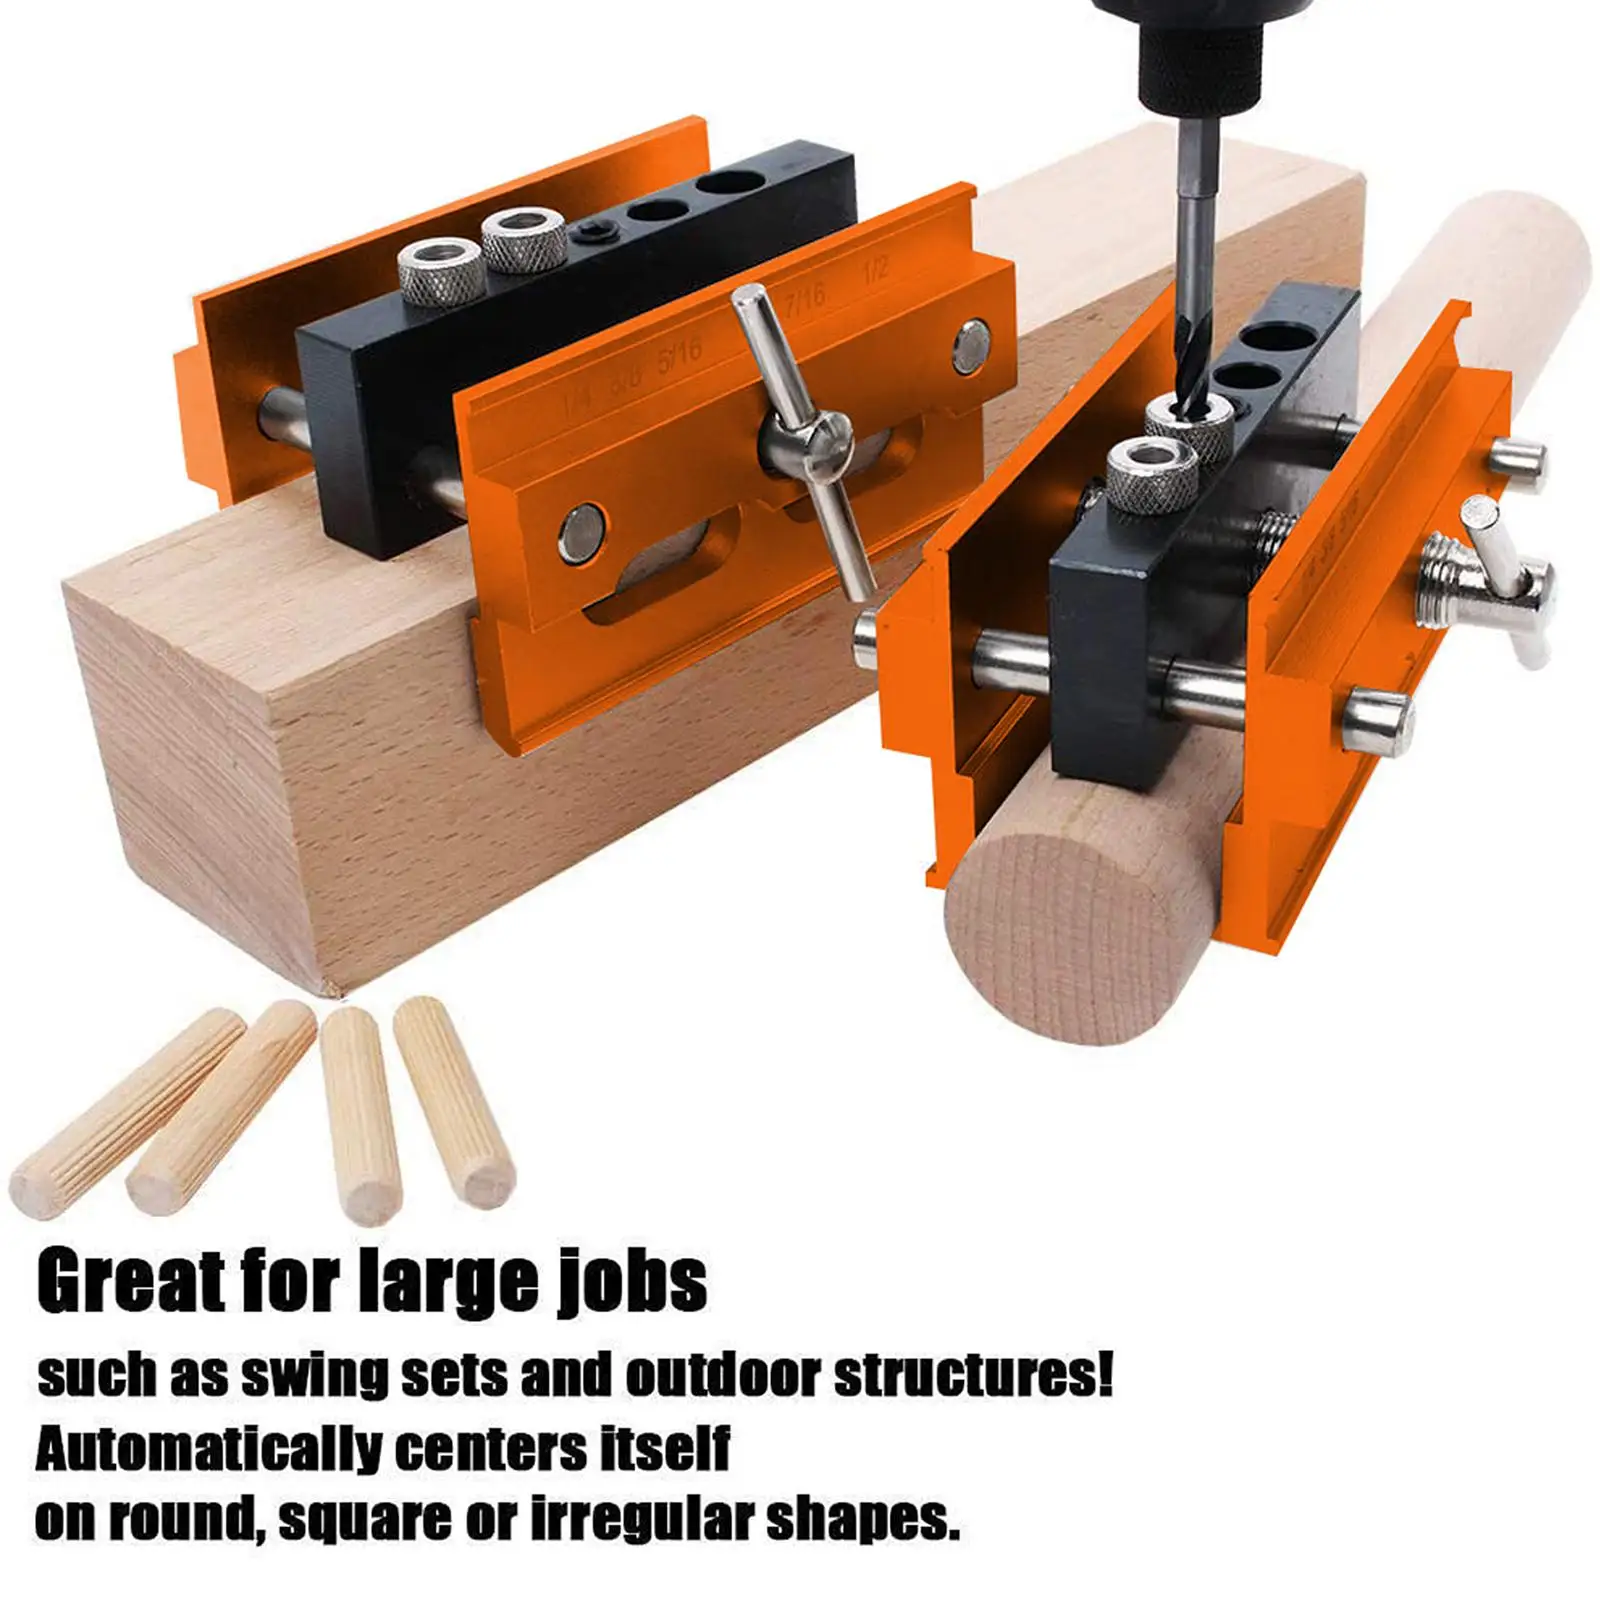 Heavy Duty Doweling Jig Self Centering with Drill Bushings Tool Drilling Kit Precise Drilling Guide for Metric Dowels Joinery